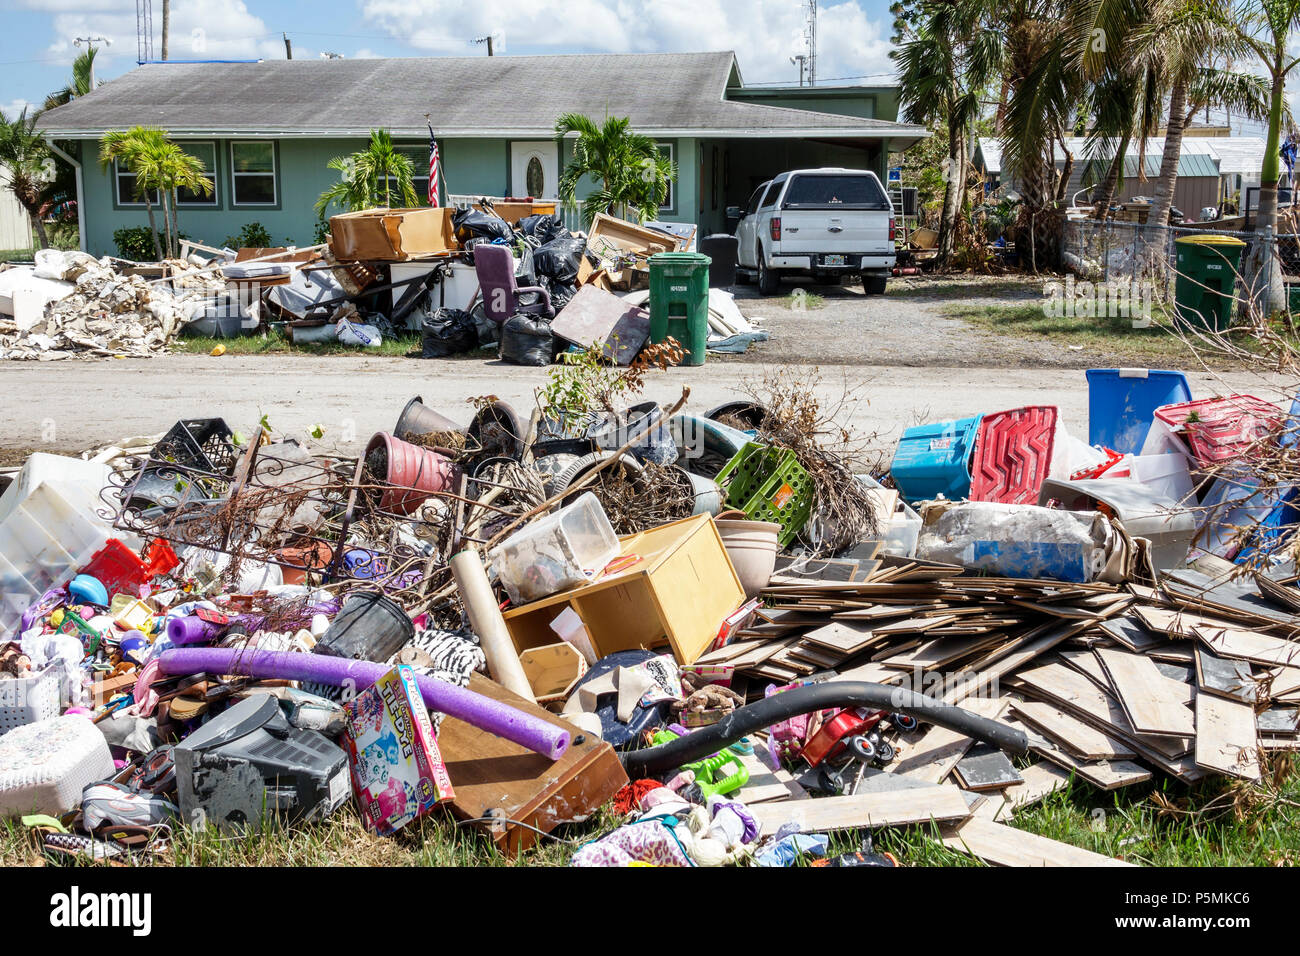 Everglades City Florida,after Hurricane Irma,houses homes residence,storm disaster recovery cleanup,surge flood damage destruction aftermath,trash,deb Stock Photo